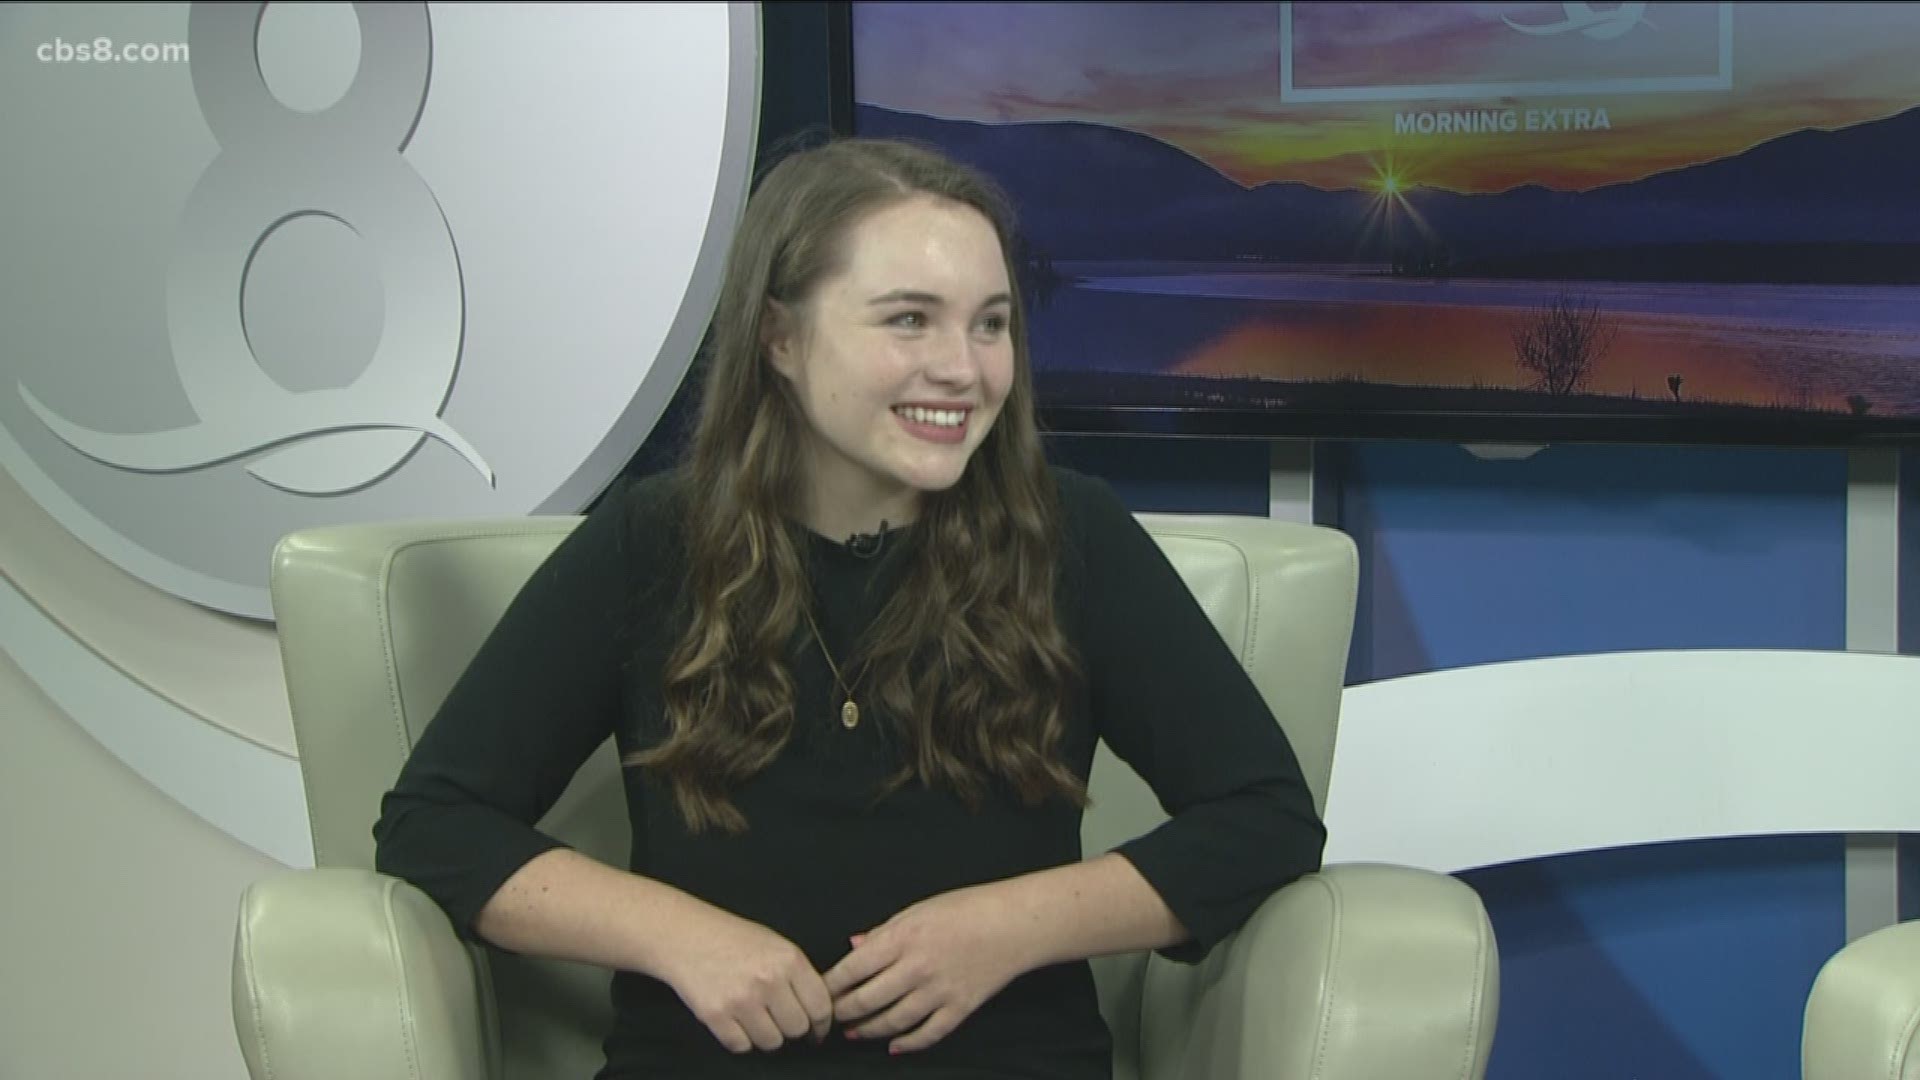 Kat Hammock dropped by Morning Extra to talk about her audition and what it is like being on Team Blake.